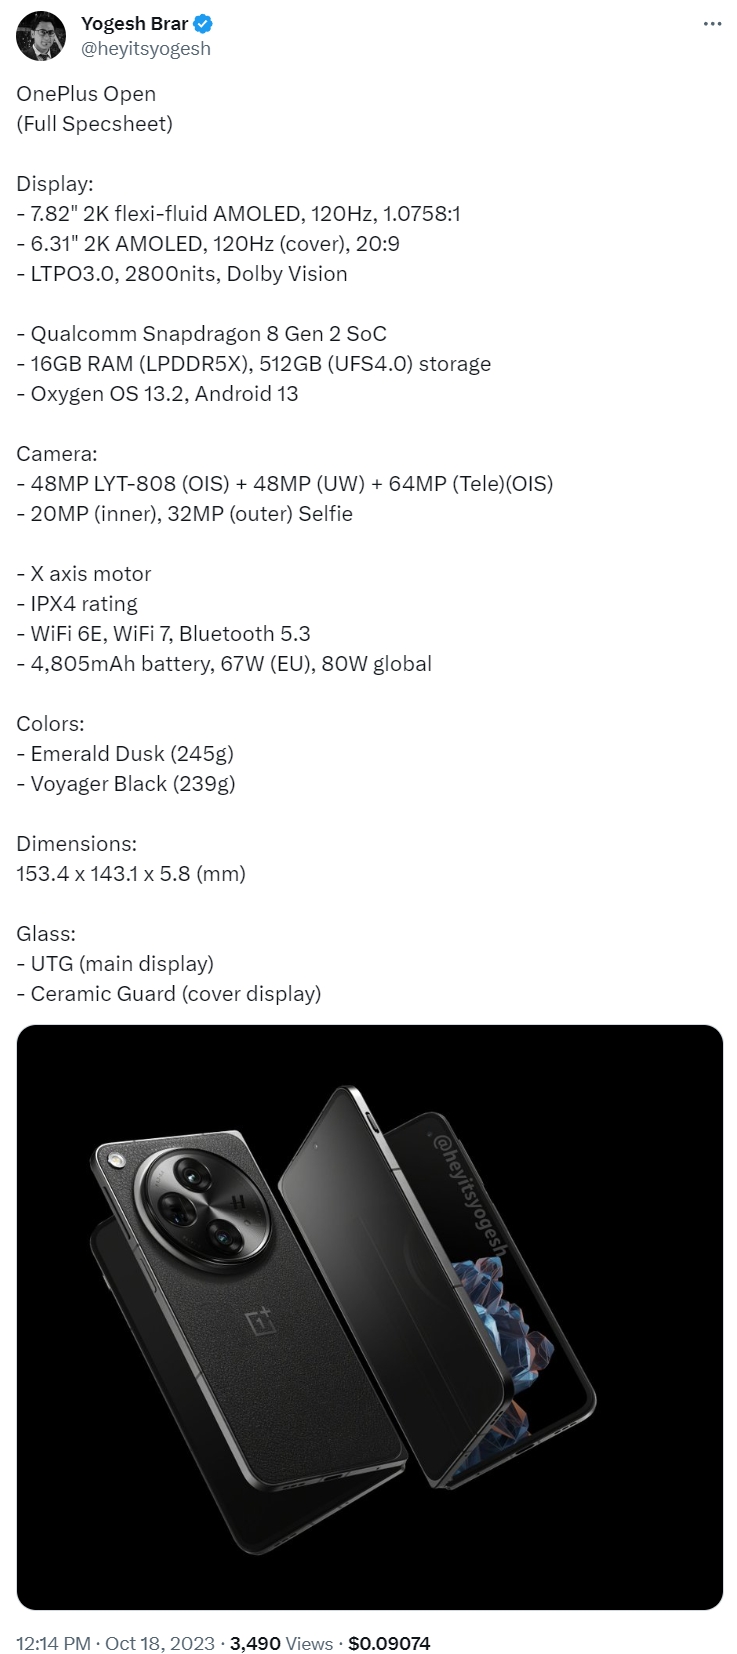 OnePlus Open leaked specifications